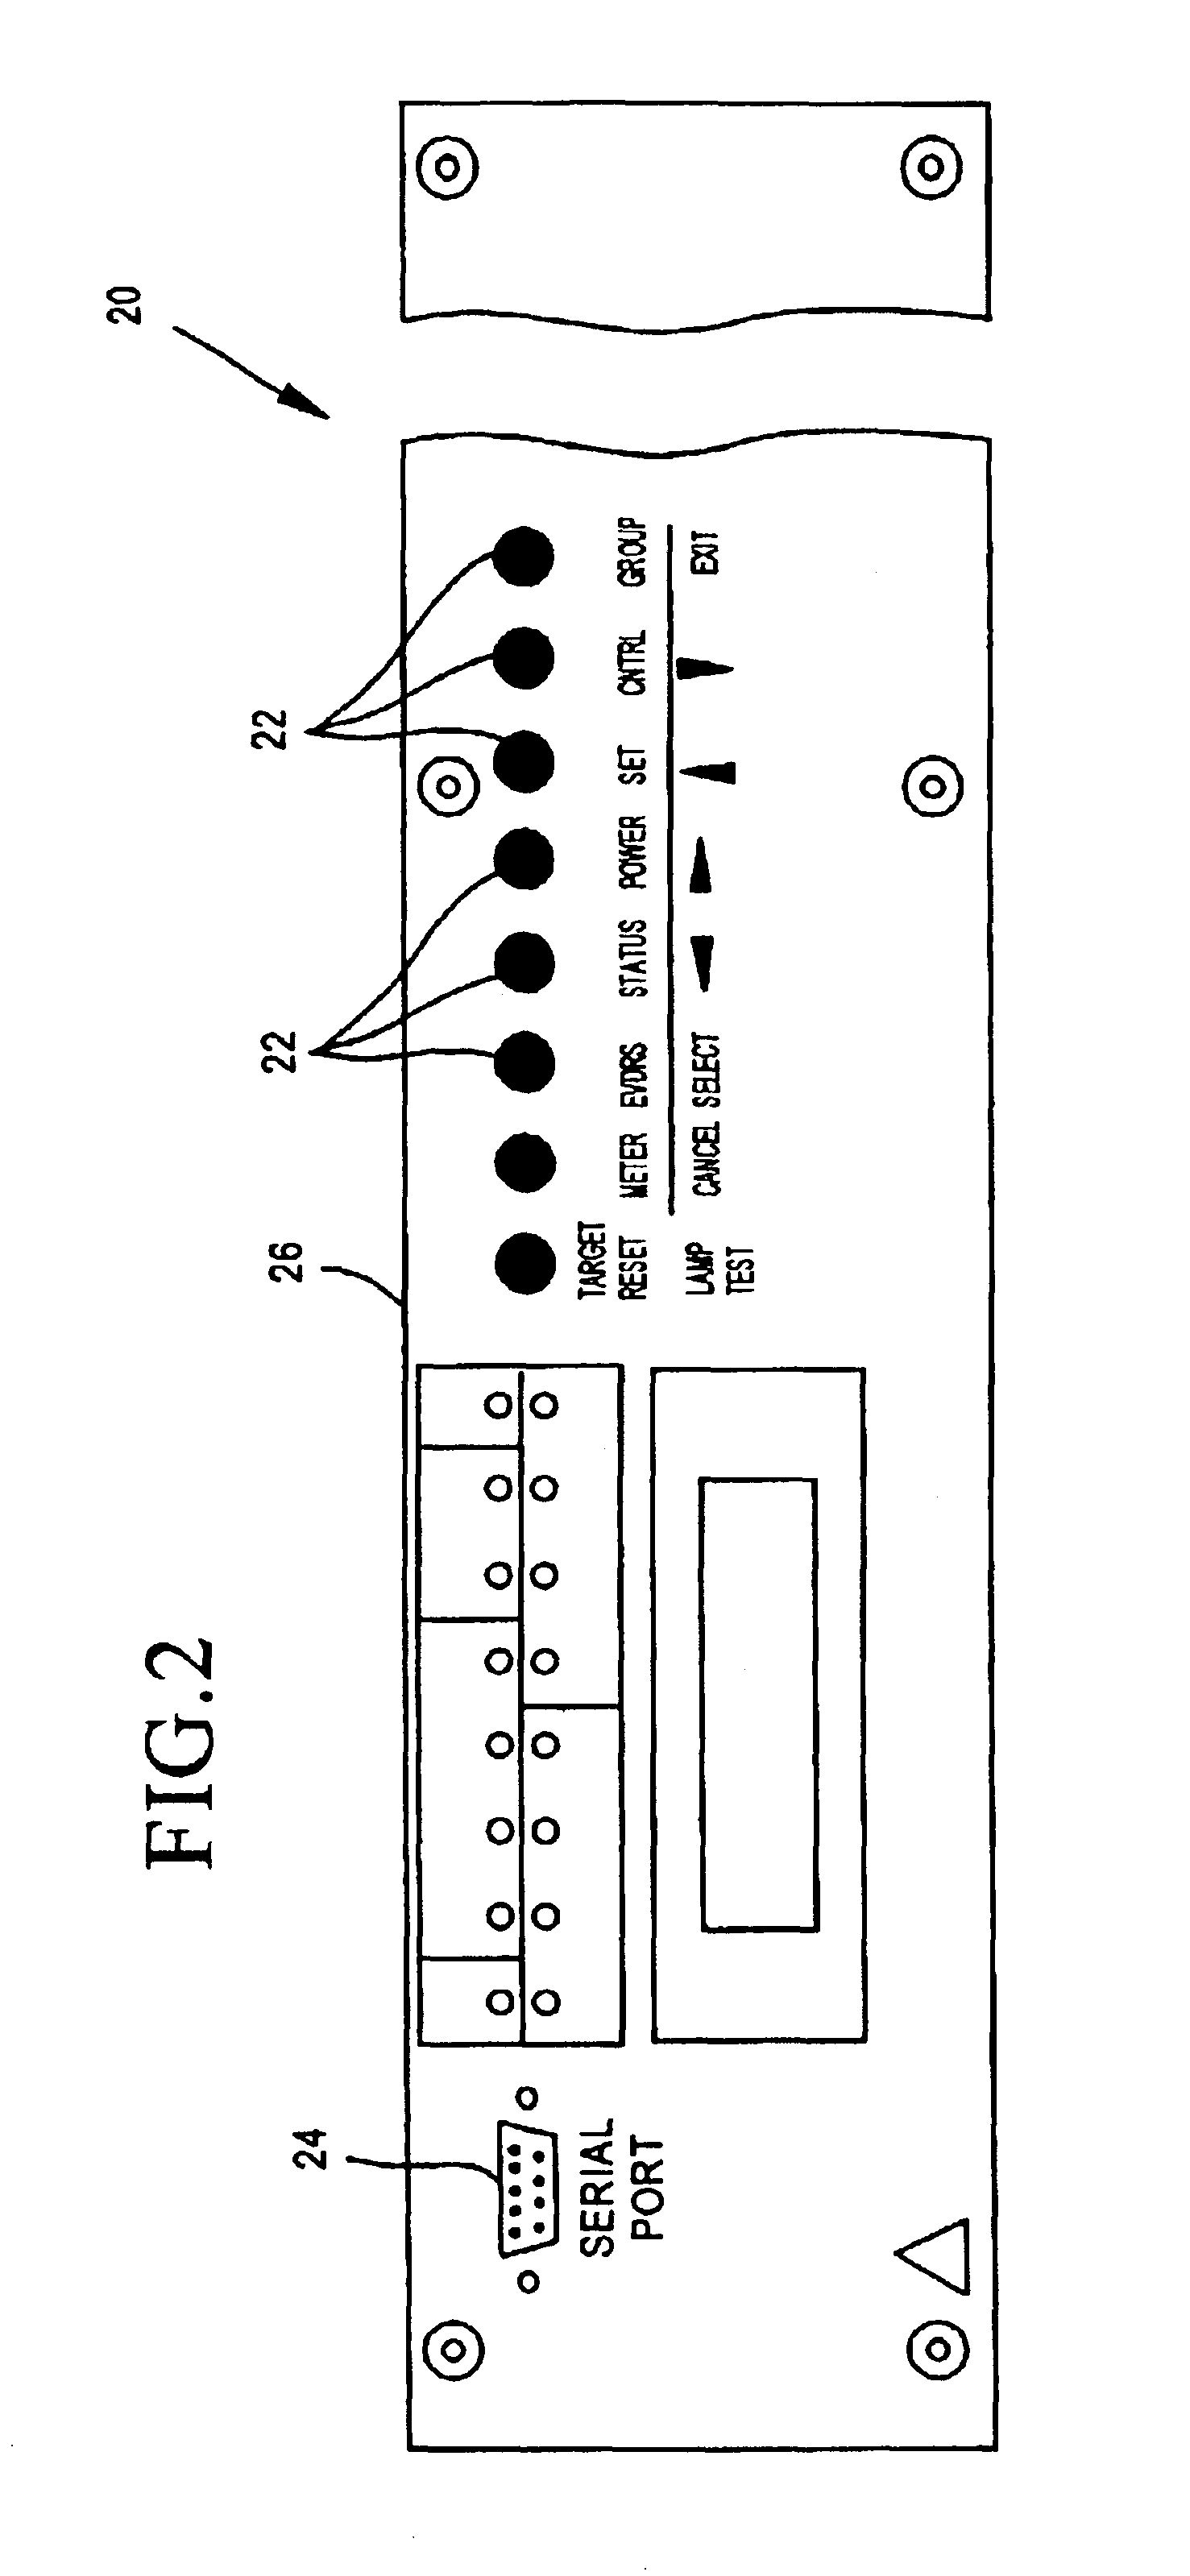 Digital protective relay for power systems with operator-initiated record keeping capability